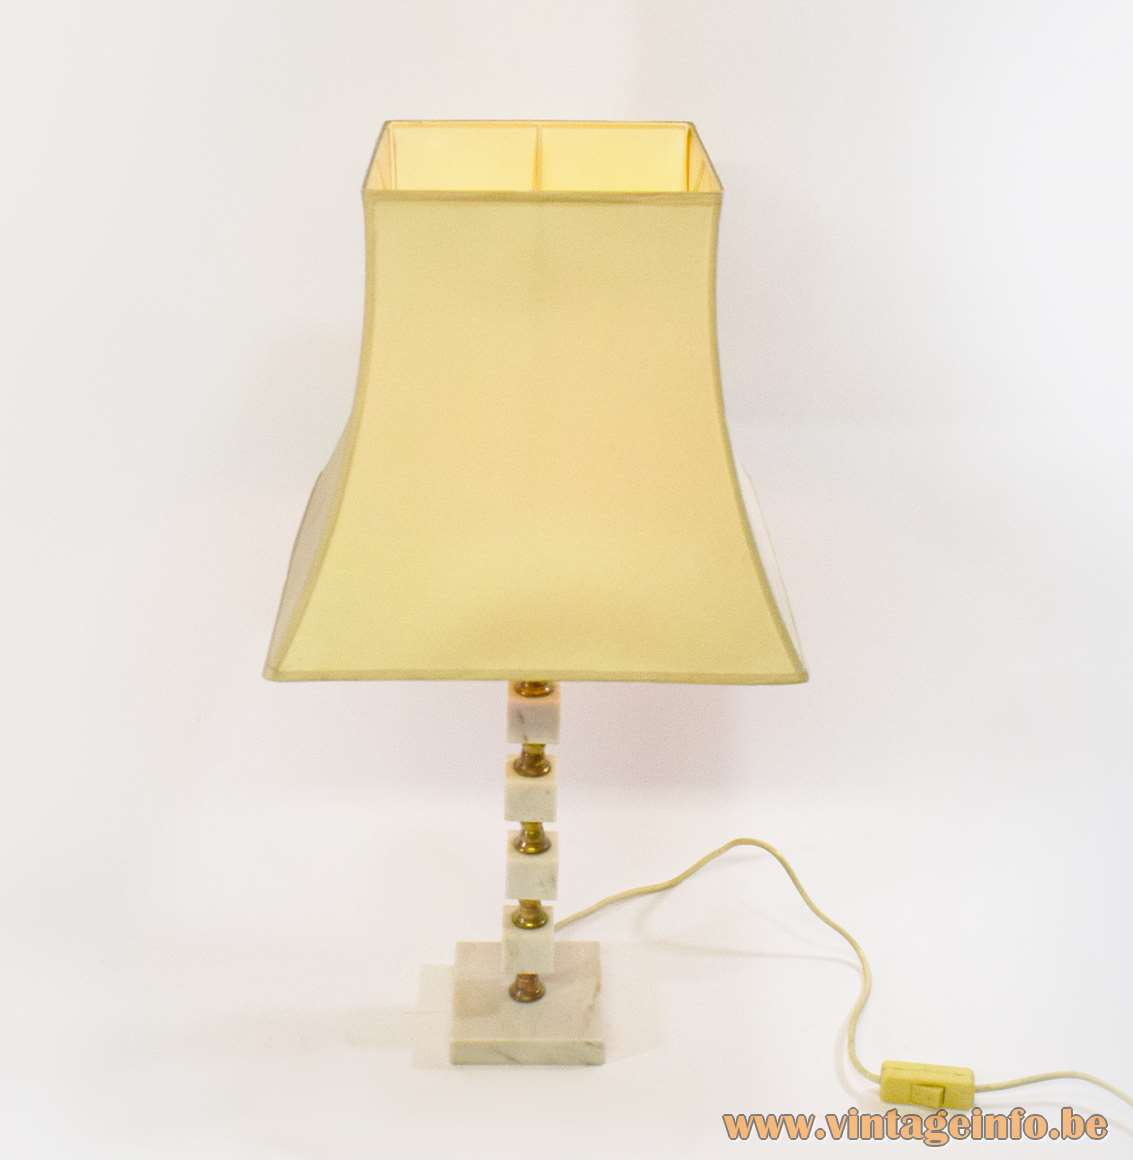 Bulgarian table lamp square marble base & cubes brass rod white pagoda lampshade 1960s 1970s